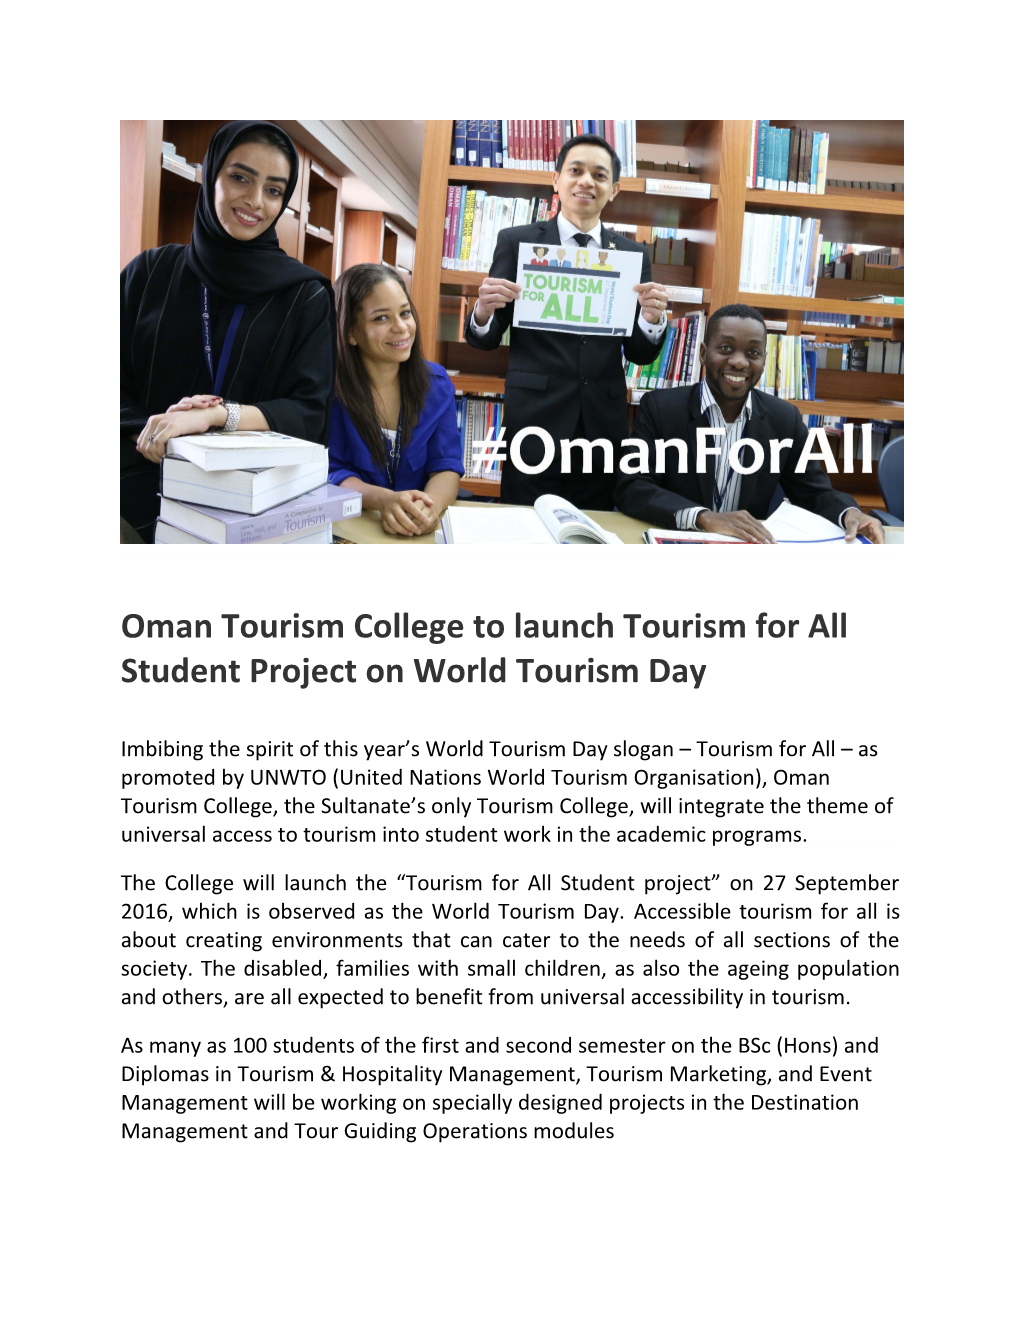 Oman Tourism College to Launch Tourism for All